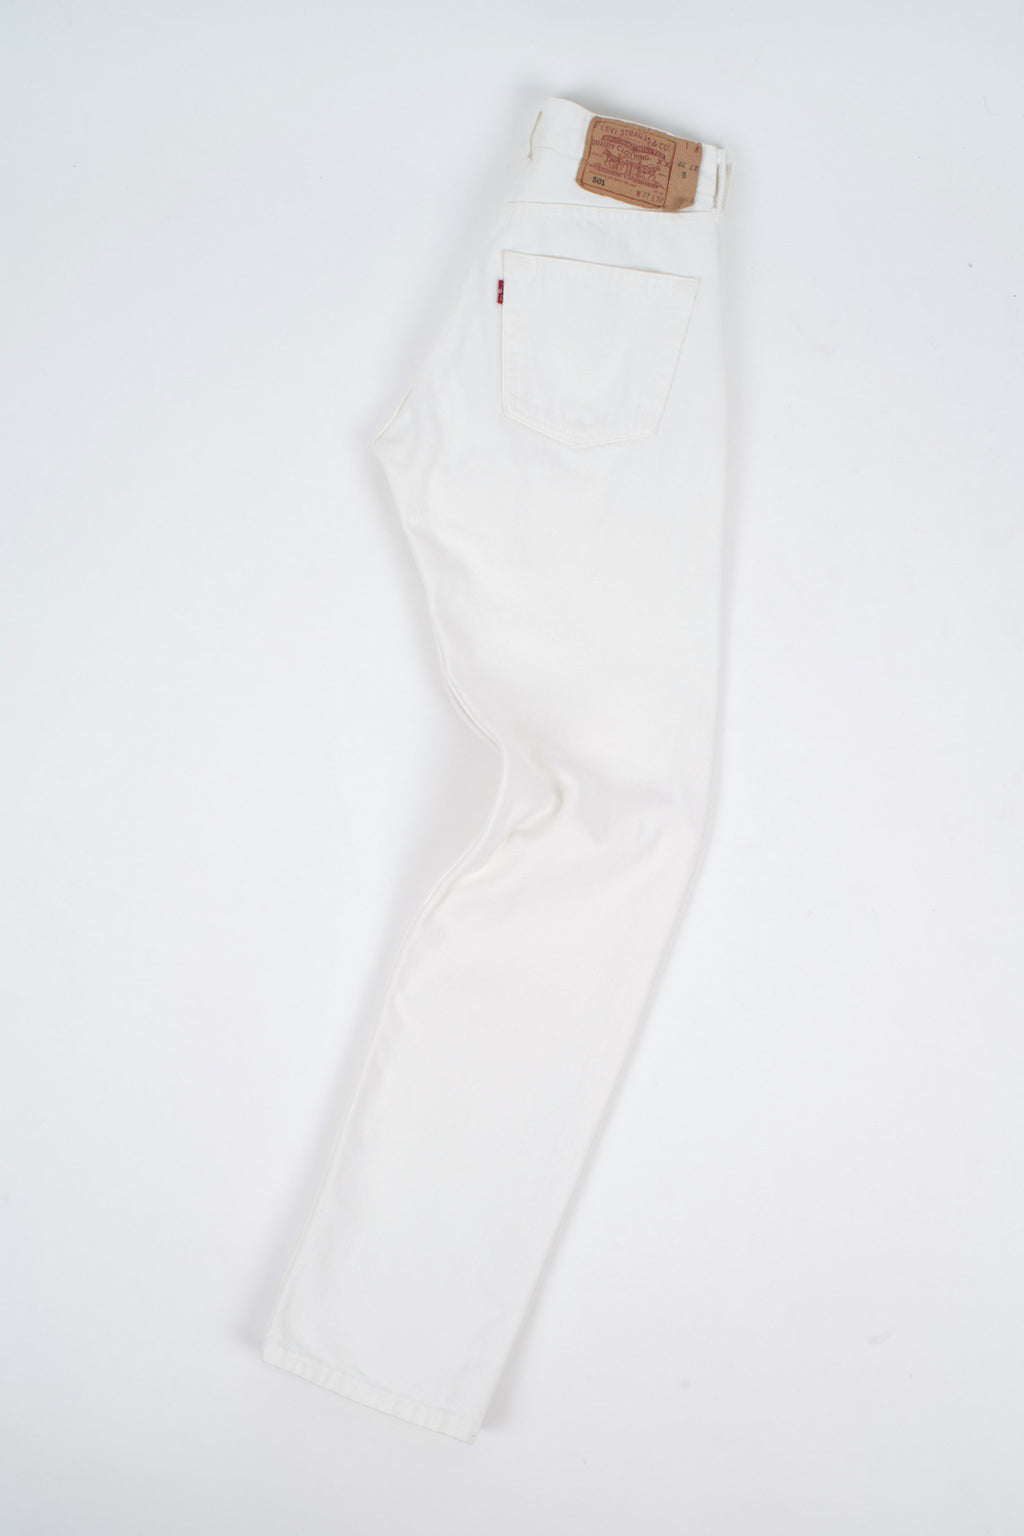 Levi’s 501 Vintage White Jeans Made in USA, W27/L32